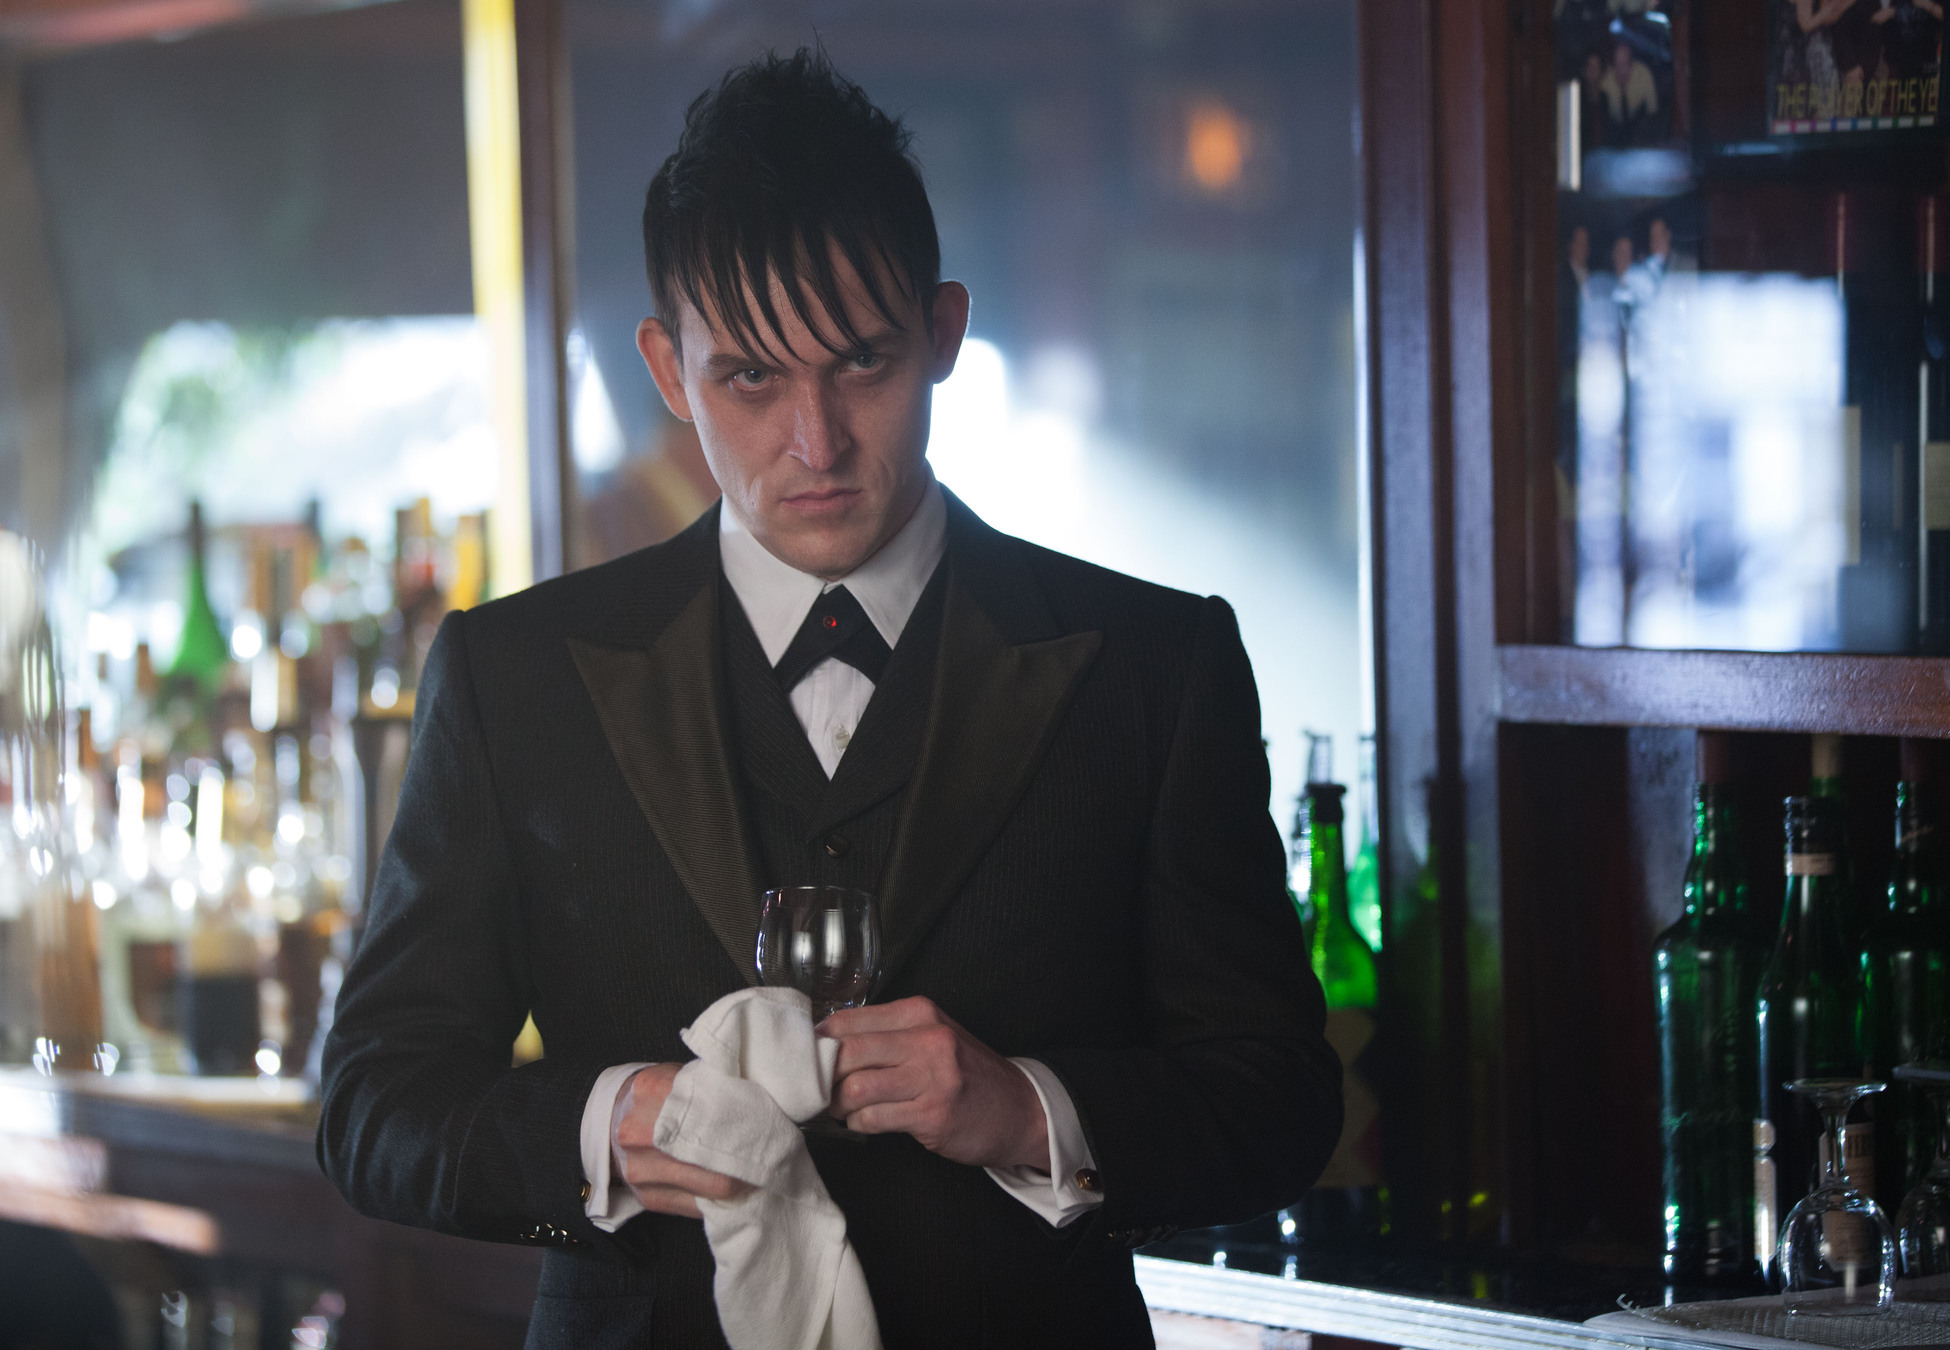 GOTHAM: Oswald Cobblepot (Robin Lord Taylor) observes Maroni's business dealings in the "Viper" episode of GOTHAM airing Monday, Oct. 20 (8:00-9:00 PM ET/PT) on FOX. Â©2014 Fox Broadcasting Co. Cr: Jessica Miglio/FOX